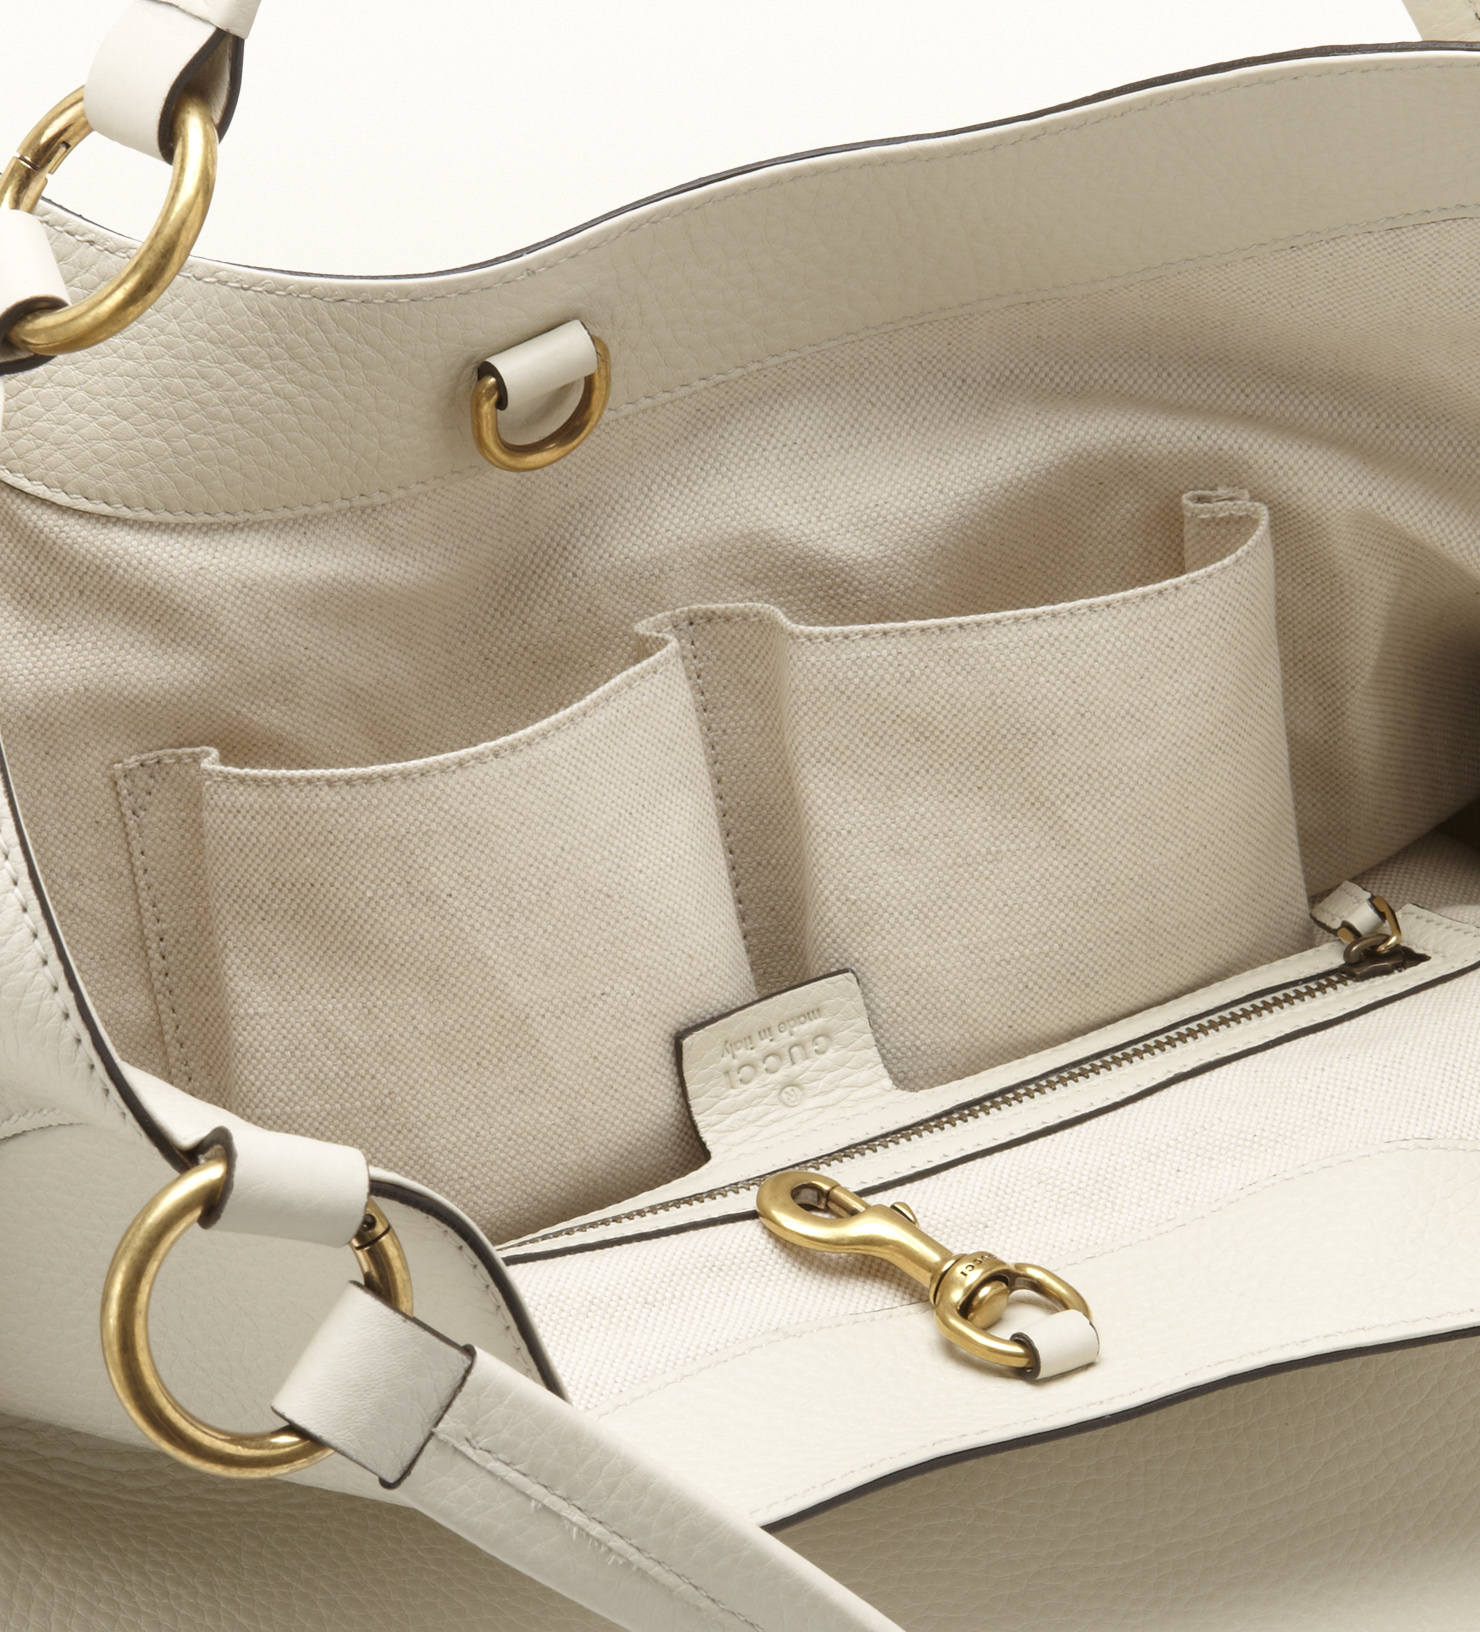 Gucci Twill White Leather Shoulder Bag - Lyst